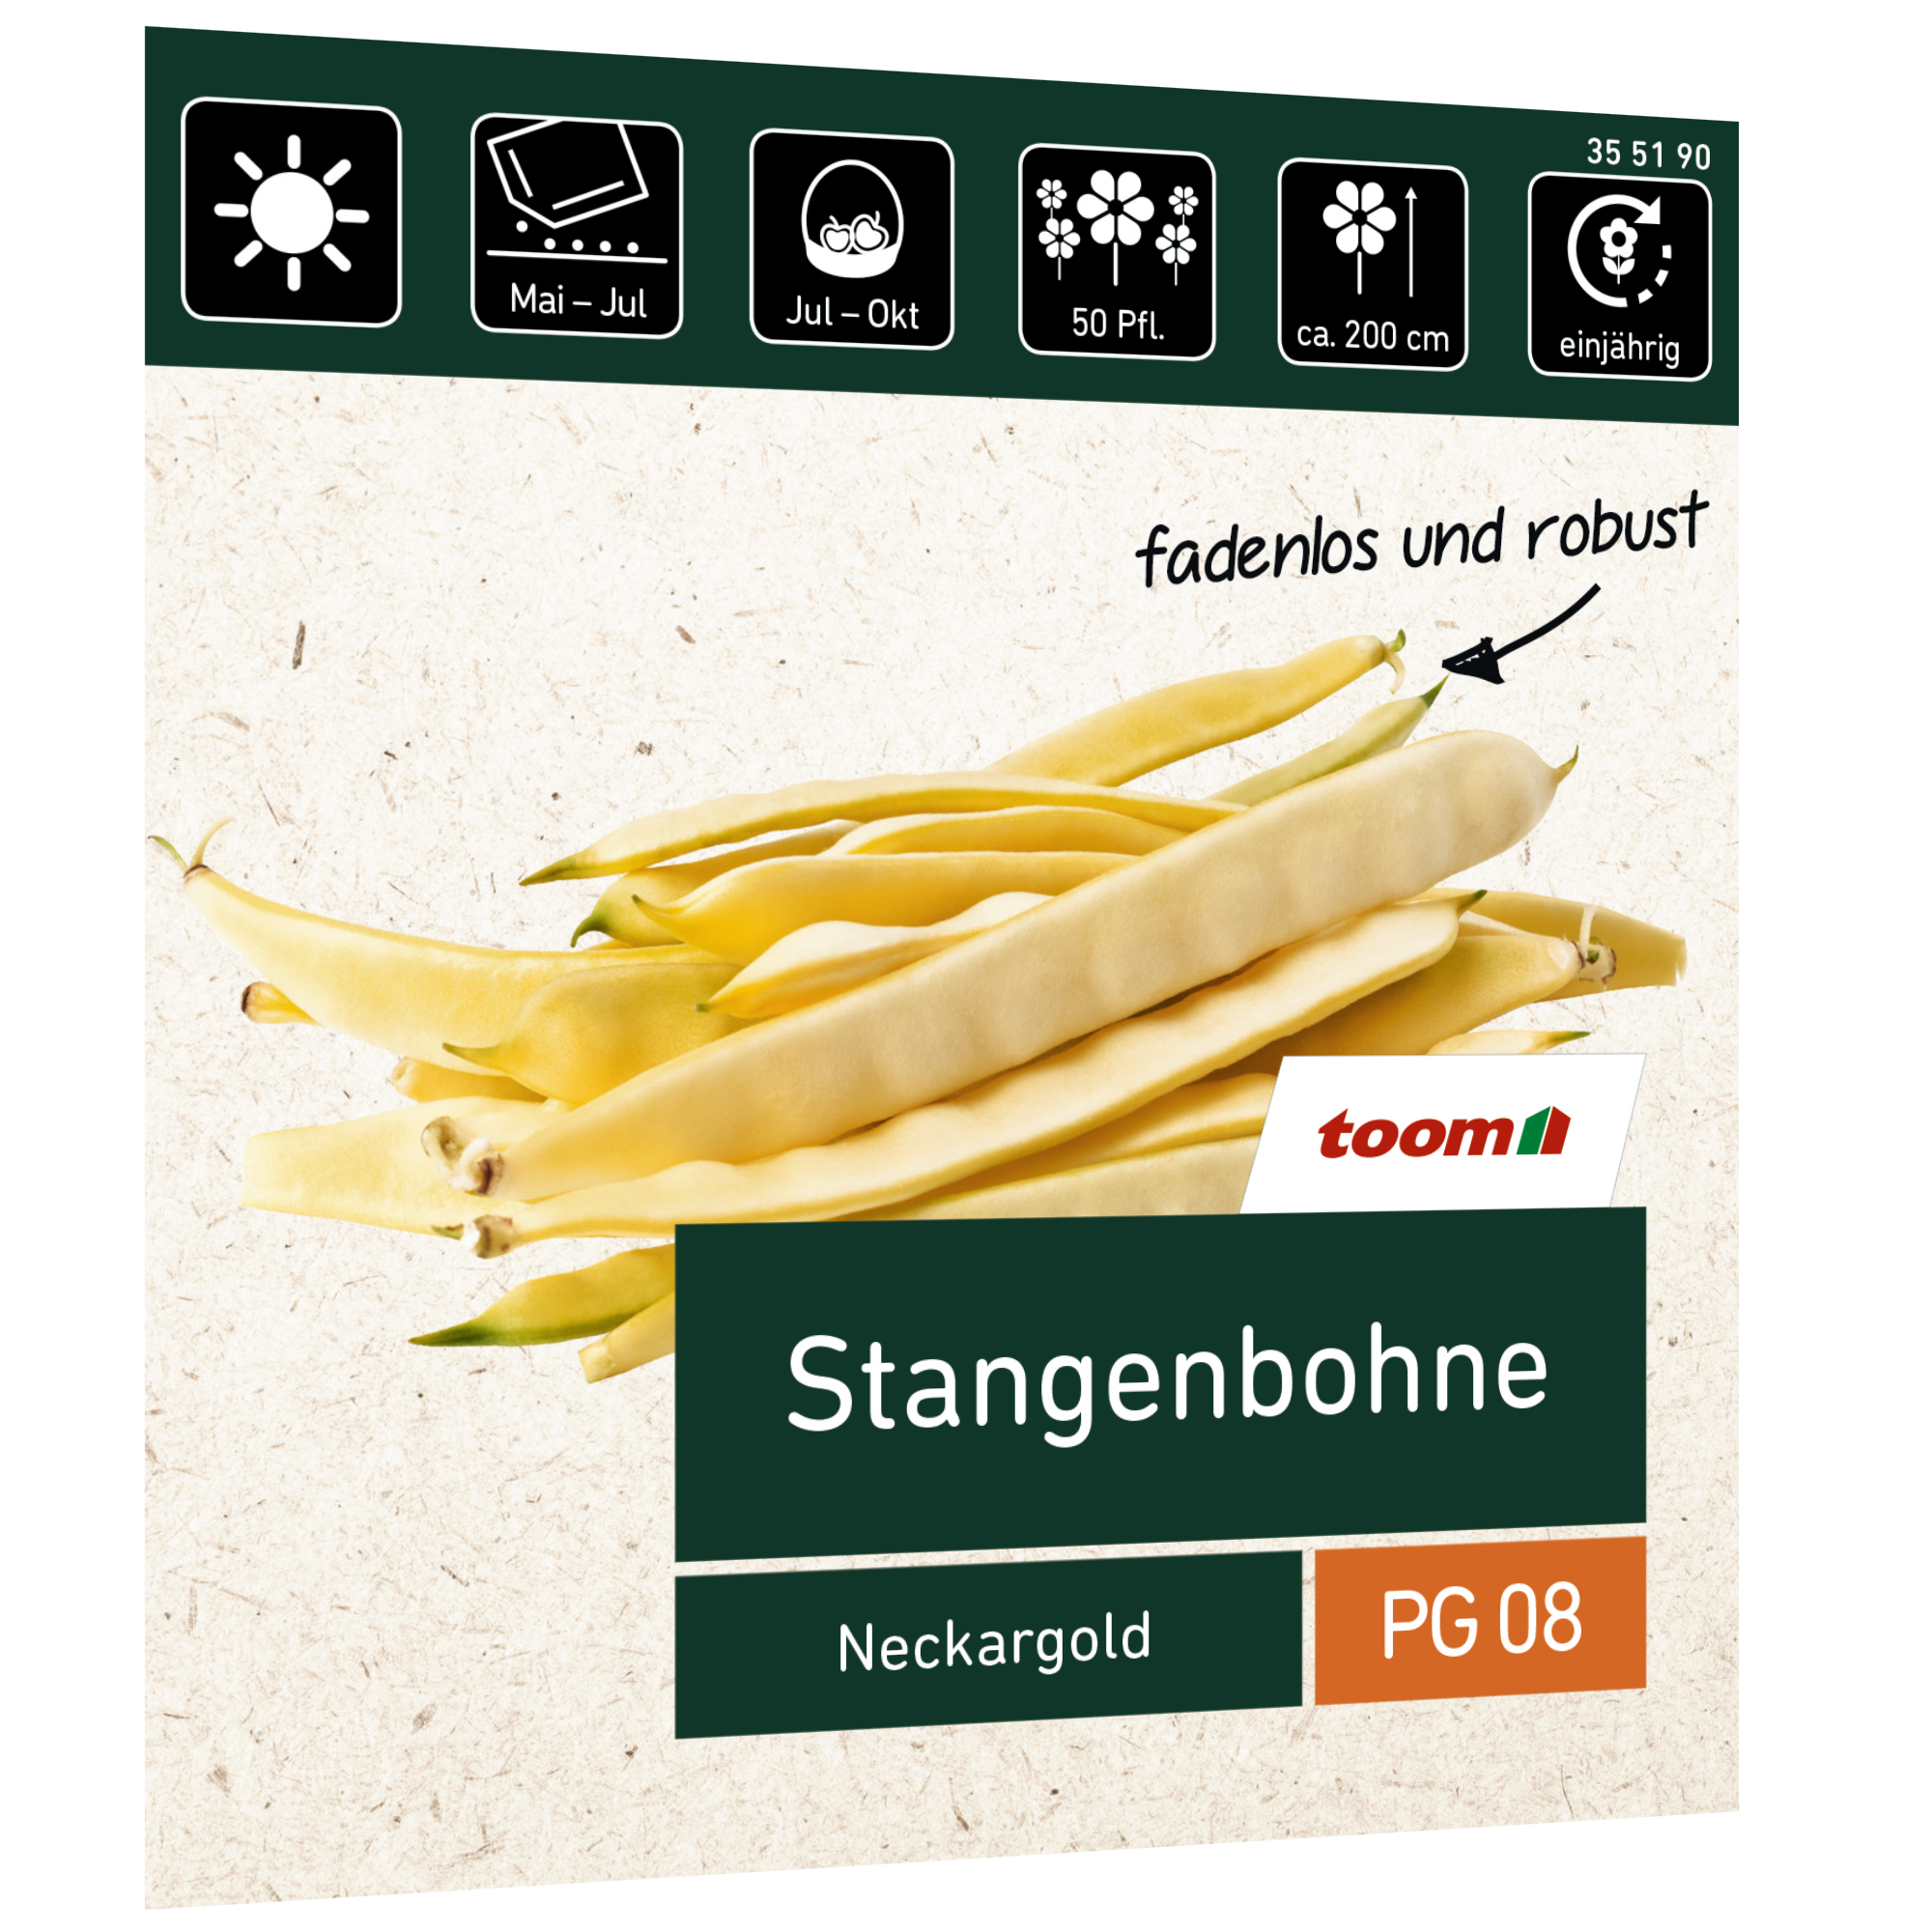 Stangenbohne 'Neckargold' + product picture